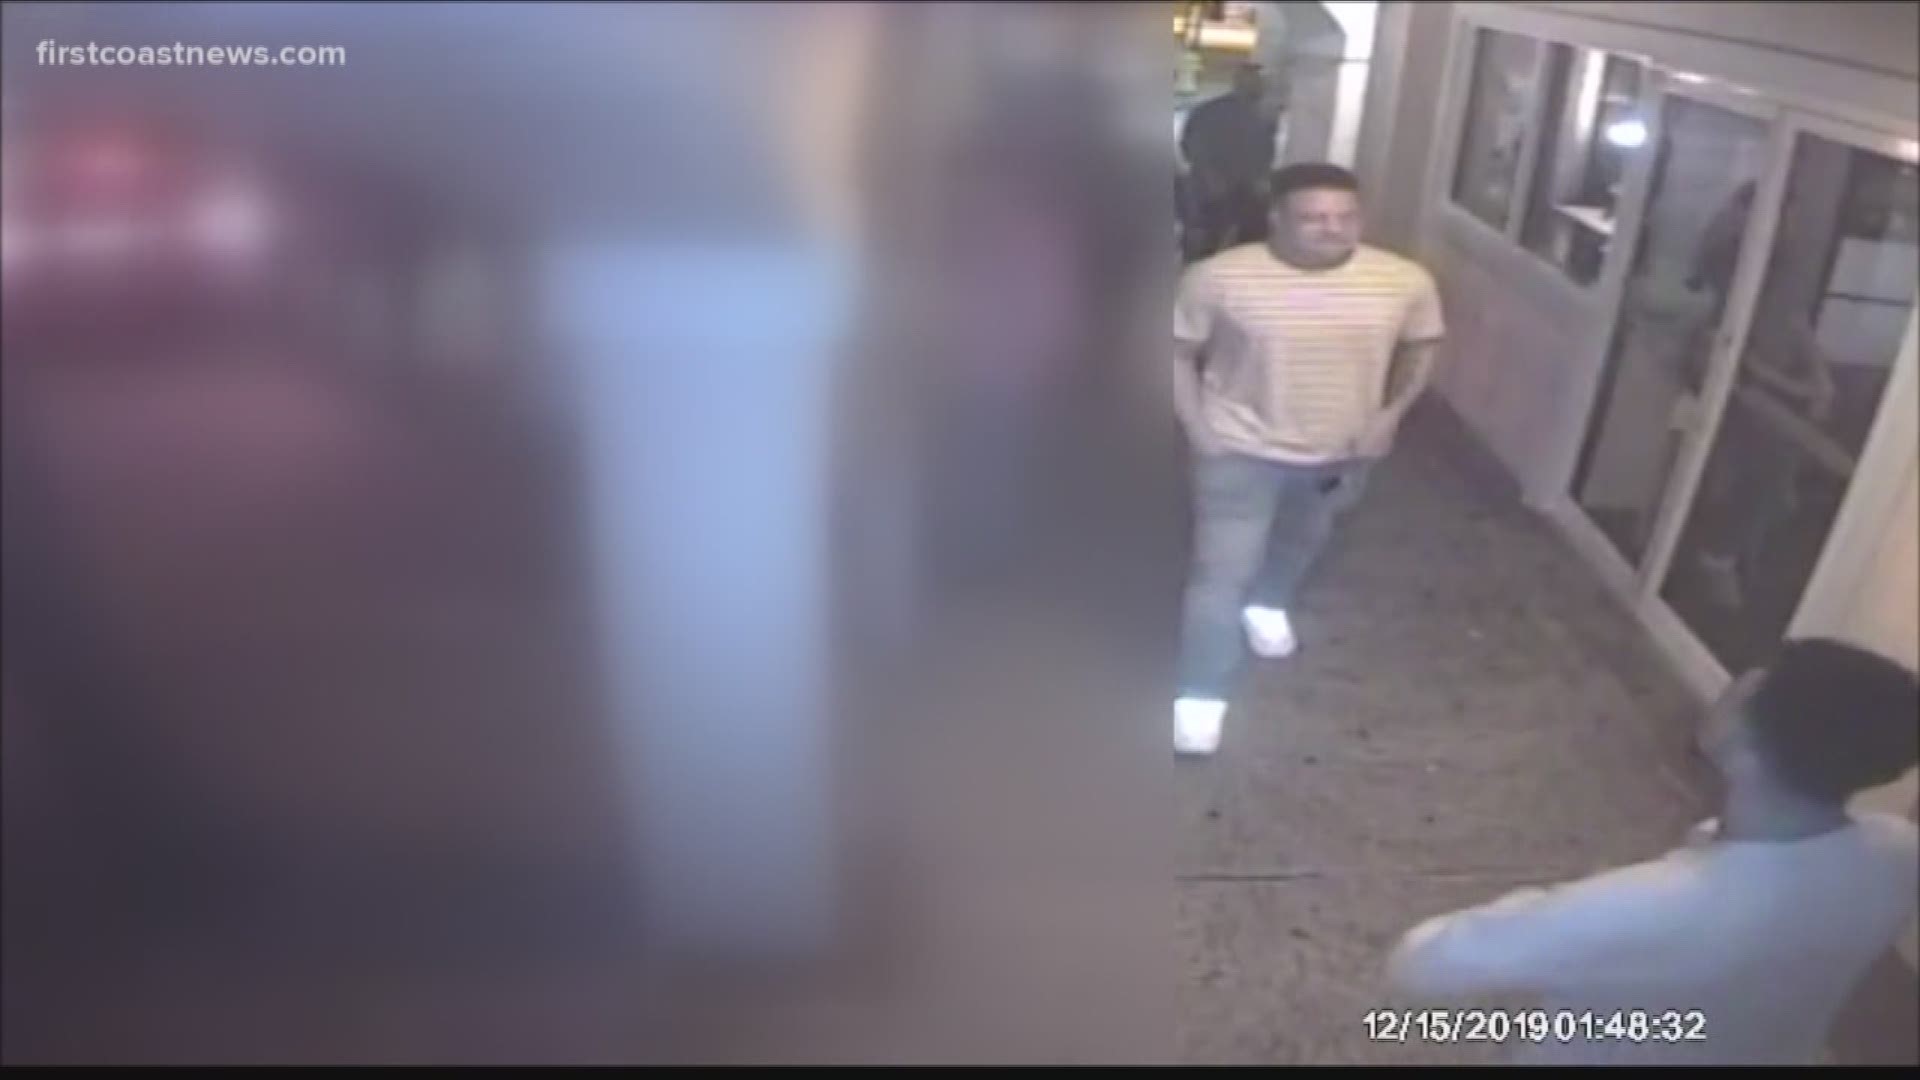 Video shows two suspected in attempted sexual assault in Jax Beac firstcoastnews